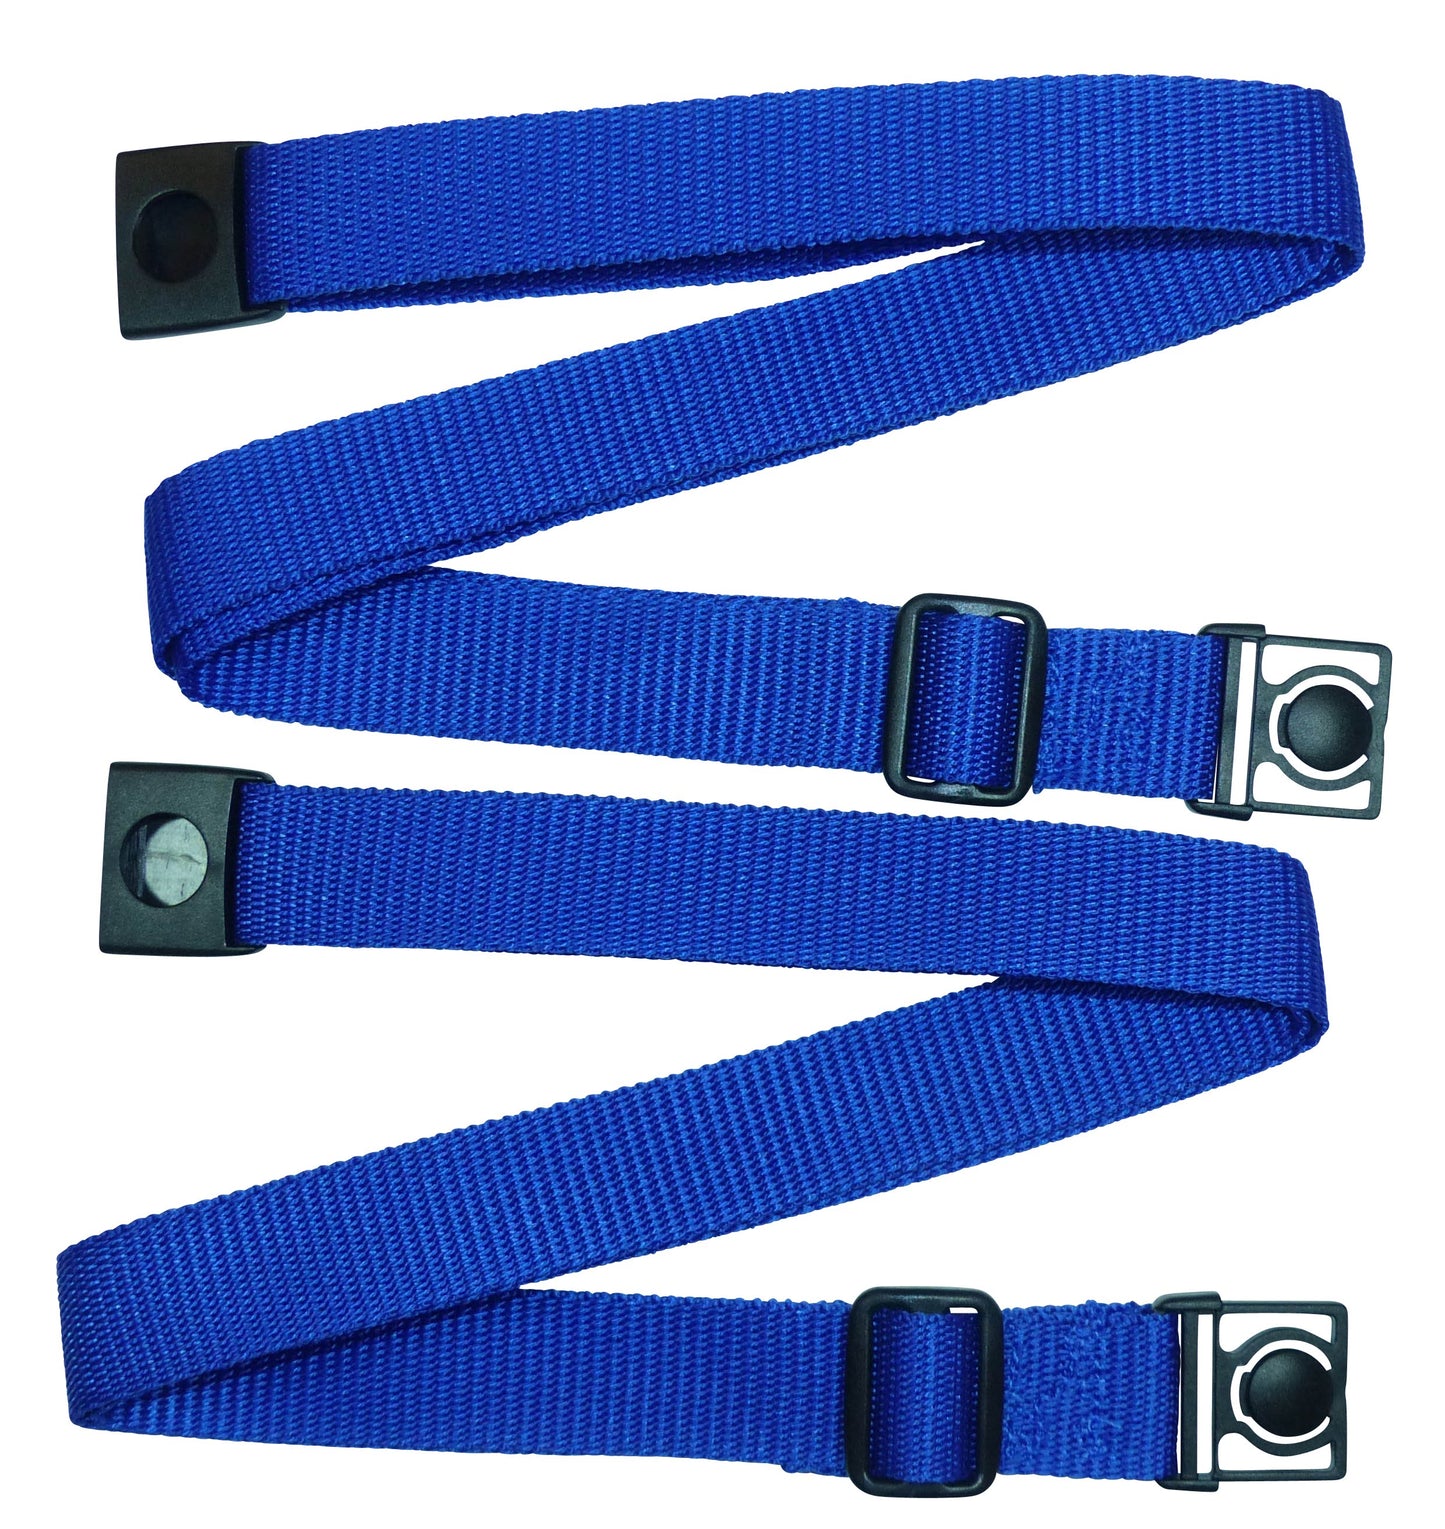 Benristraps 25mm Webbing Strap with Button Release and Triglide Slider Buckles (Pair) in Blue